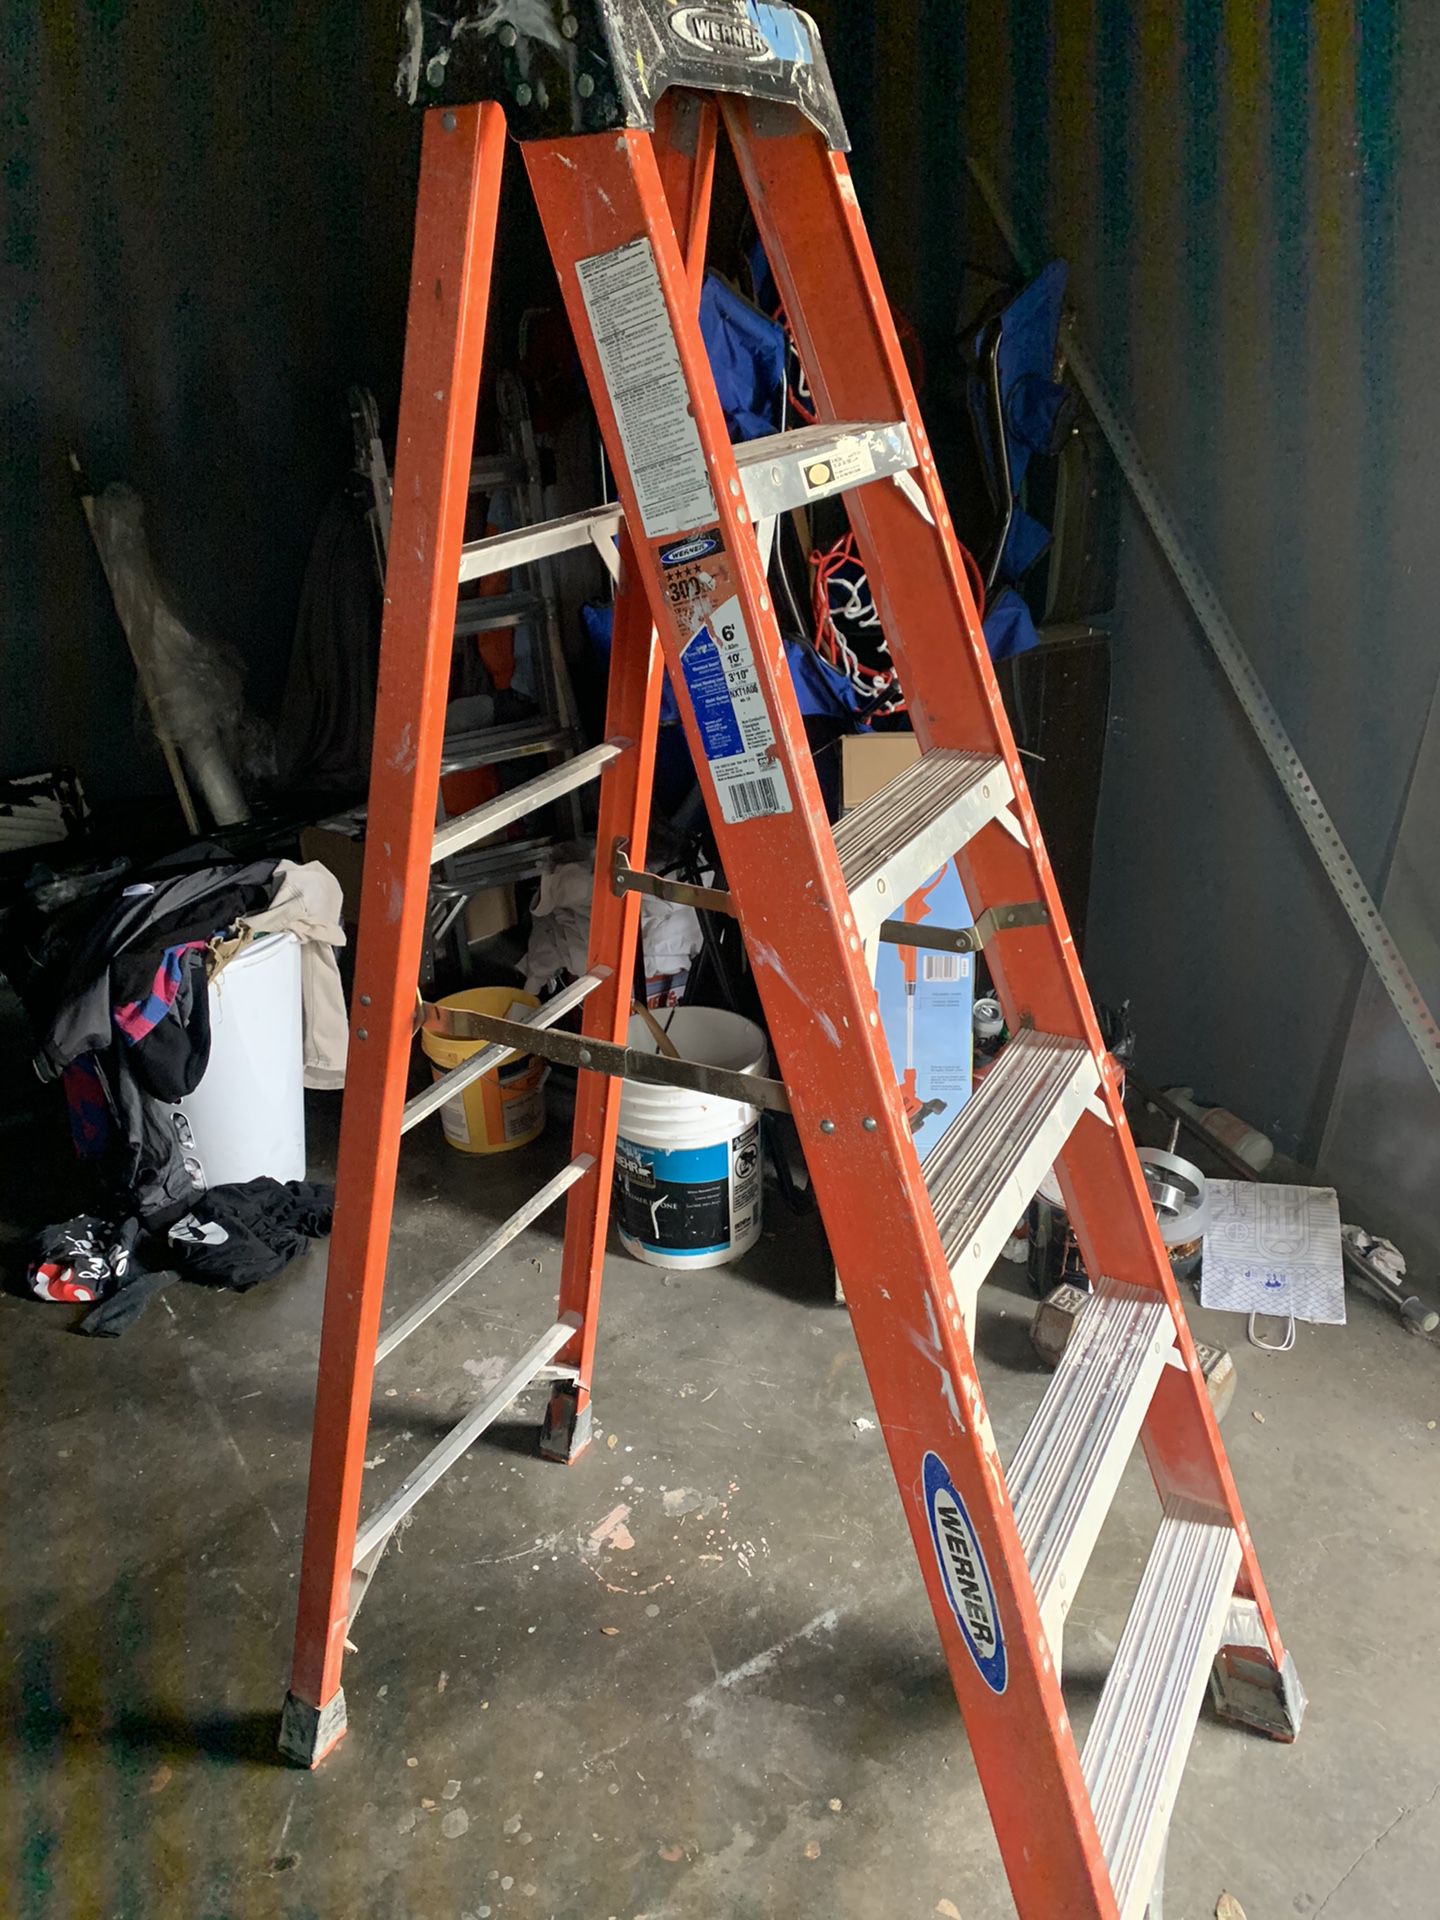 6’ Werner Ladder purchased in 2018 works perfectly